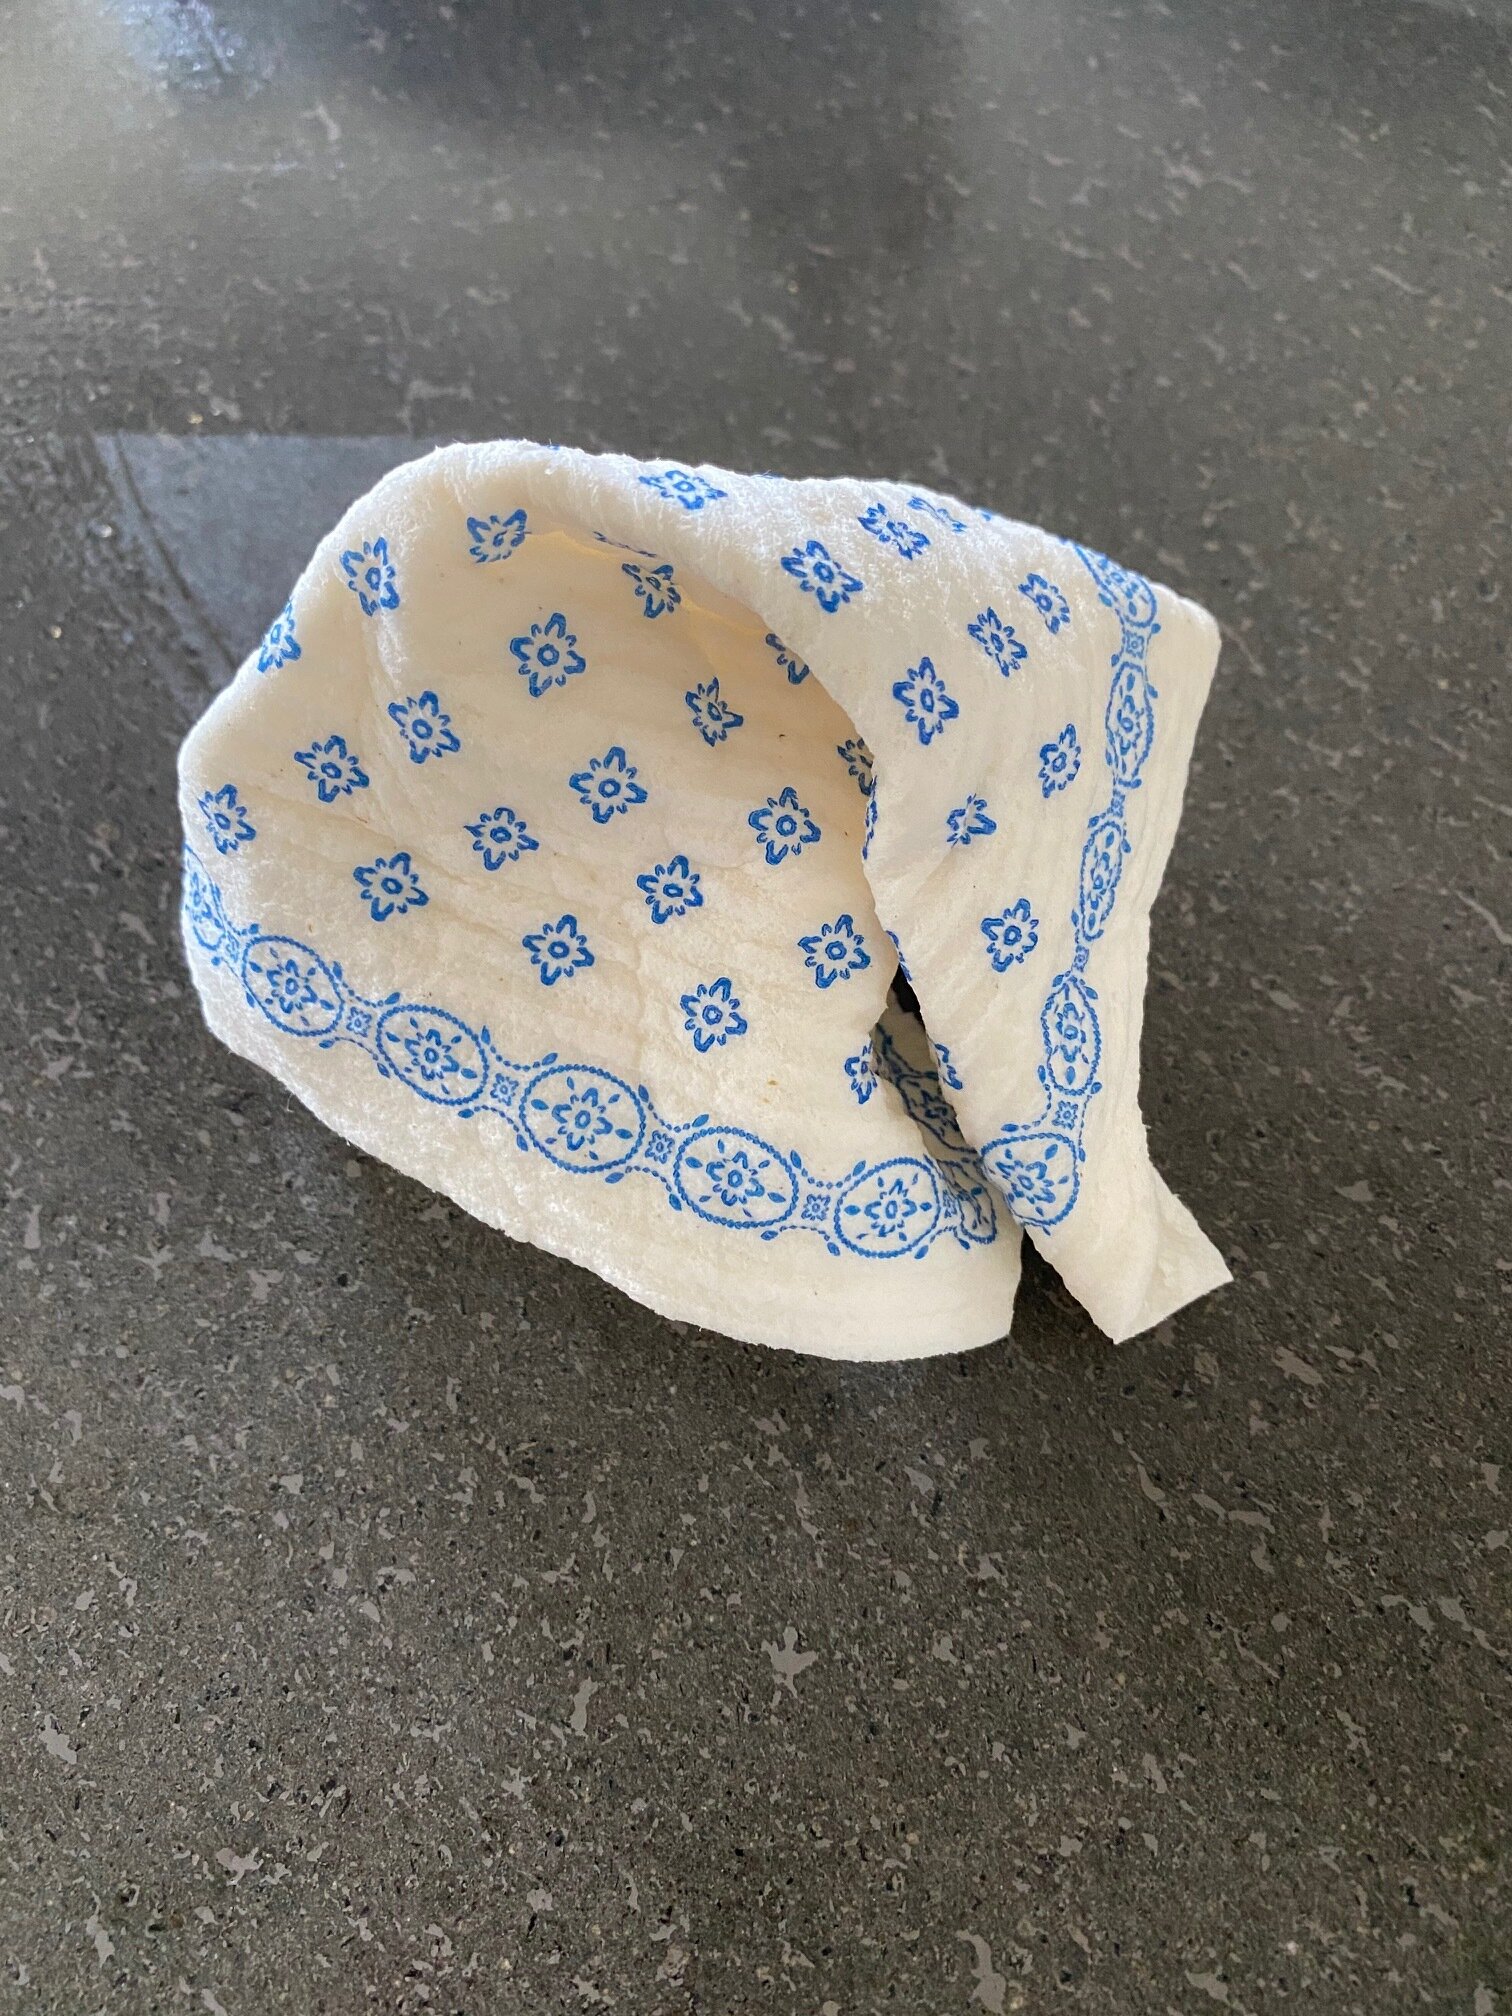 I Tried Swedish Dishcloths and They Are Amazing